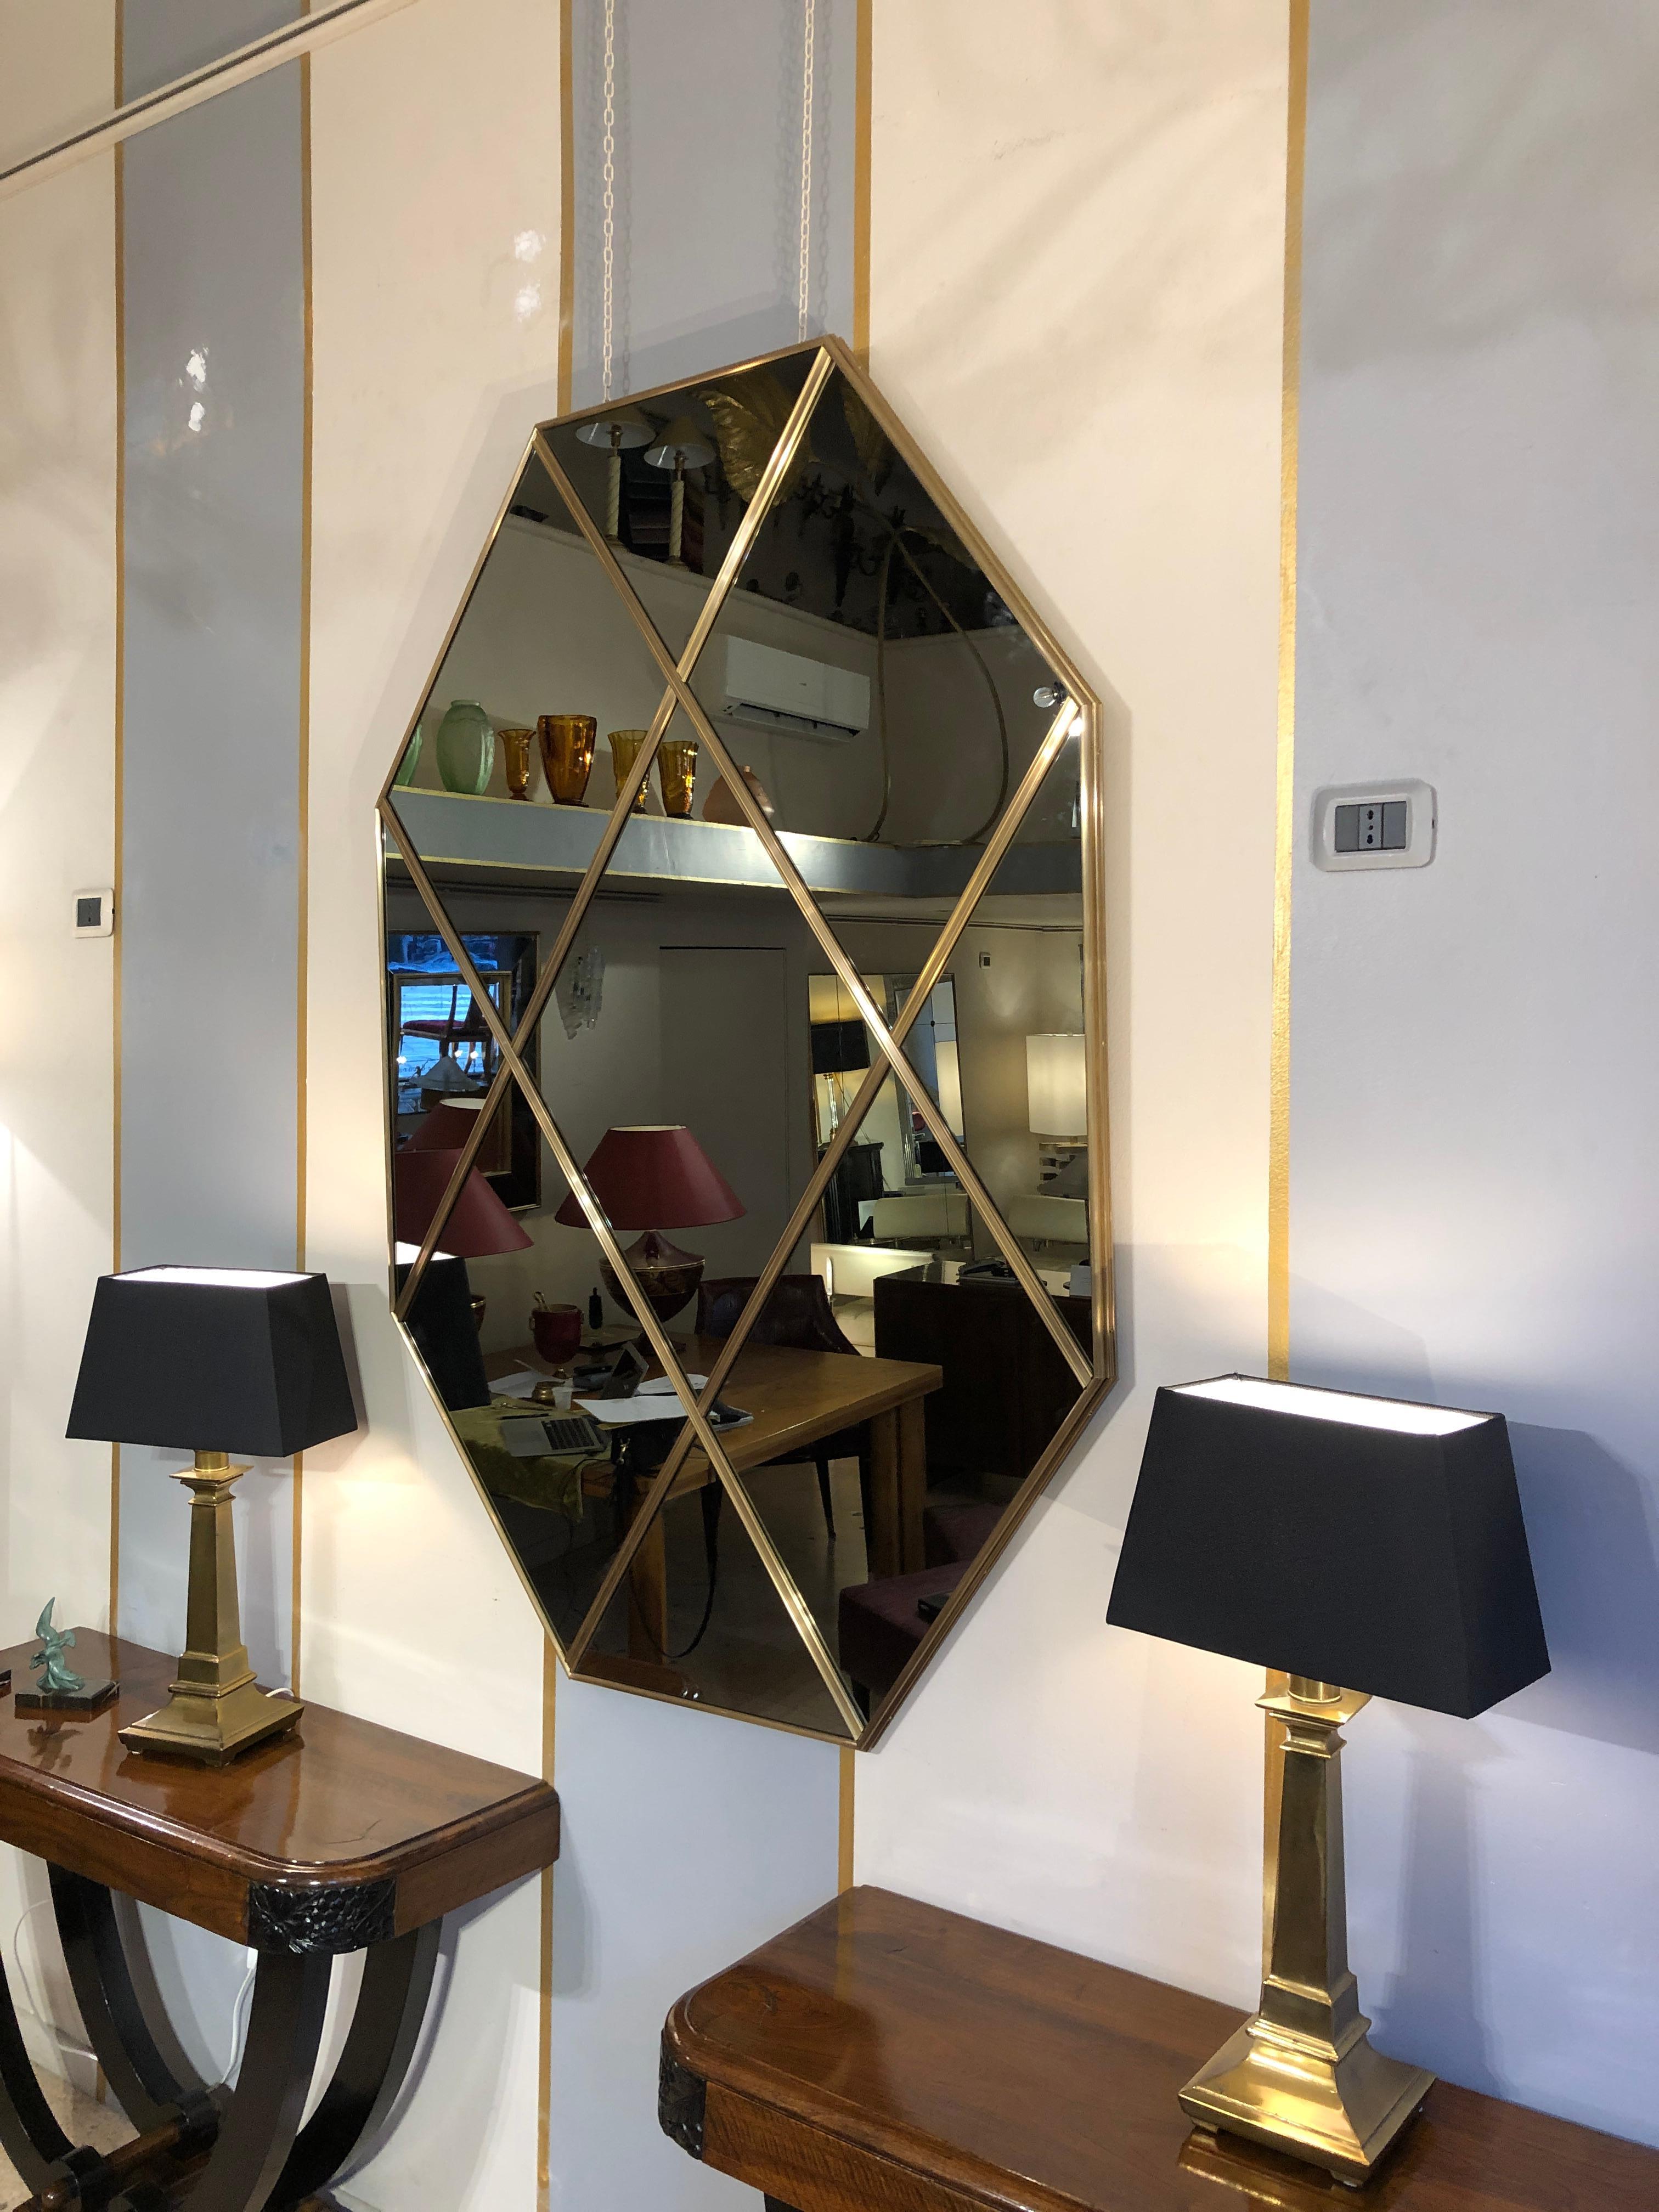 Pescetta presents its new collection of contemporary customizable brass frame mirrors. With frame made of brass and multi panels window look, these mirrors replicate the idea of early 20th century Art Deco style. They suit both modern spaces that